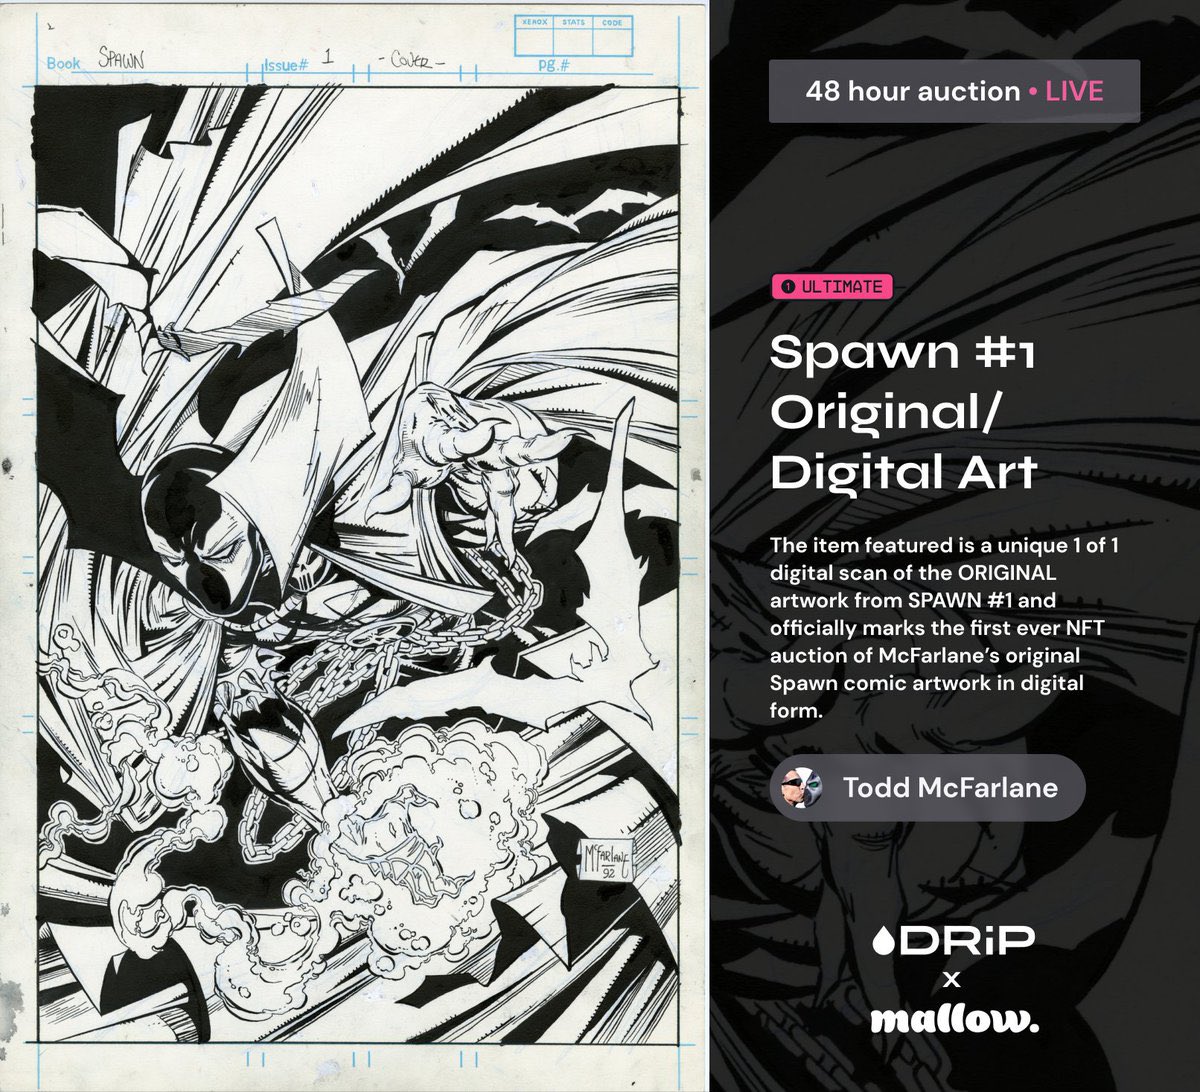 Under 24 hours remaining in @Todd_McFarlane’s historic SPAWN #1 Auction! Ends at 7 am PST on May 15th ⏱️ - last minute bids will add 10 mins to timer! Current bid is over 10 SOL! Don’t miss this once in a lifetime opportunity to grab some #Spawn history!